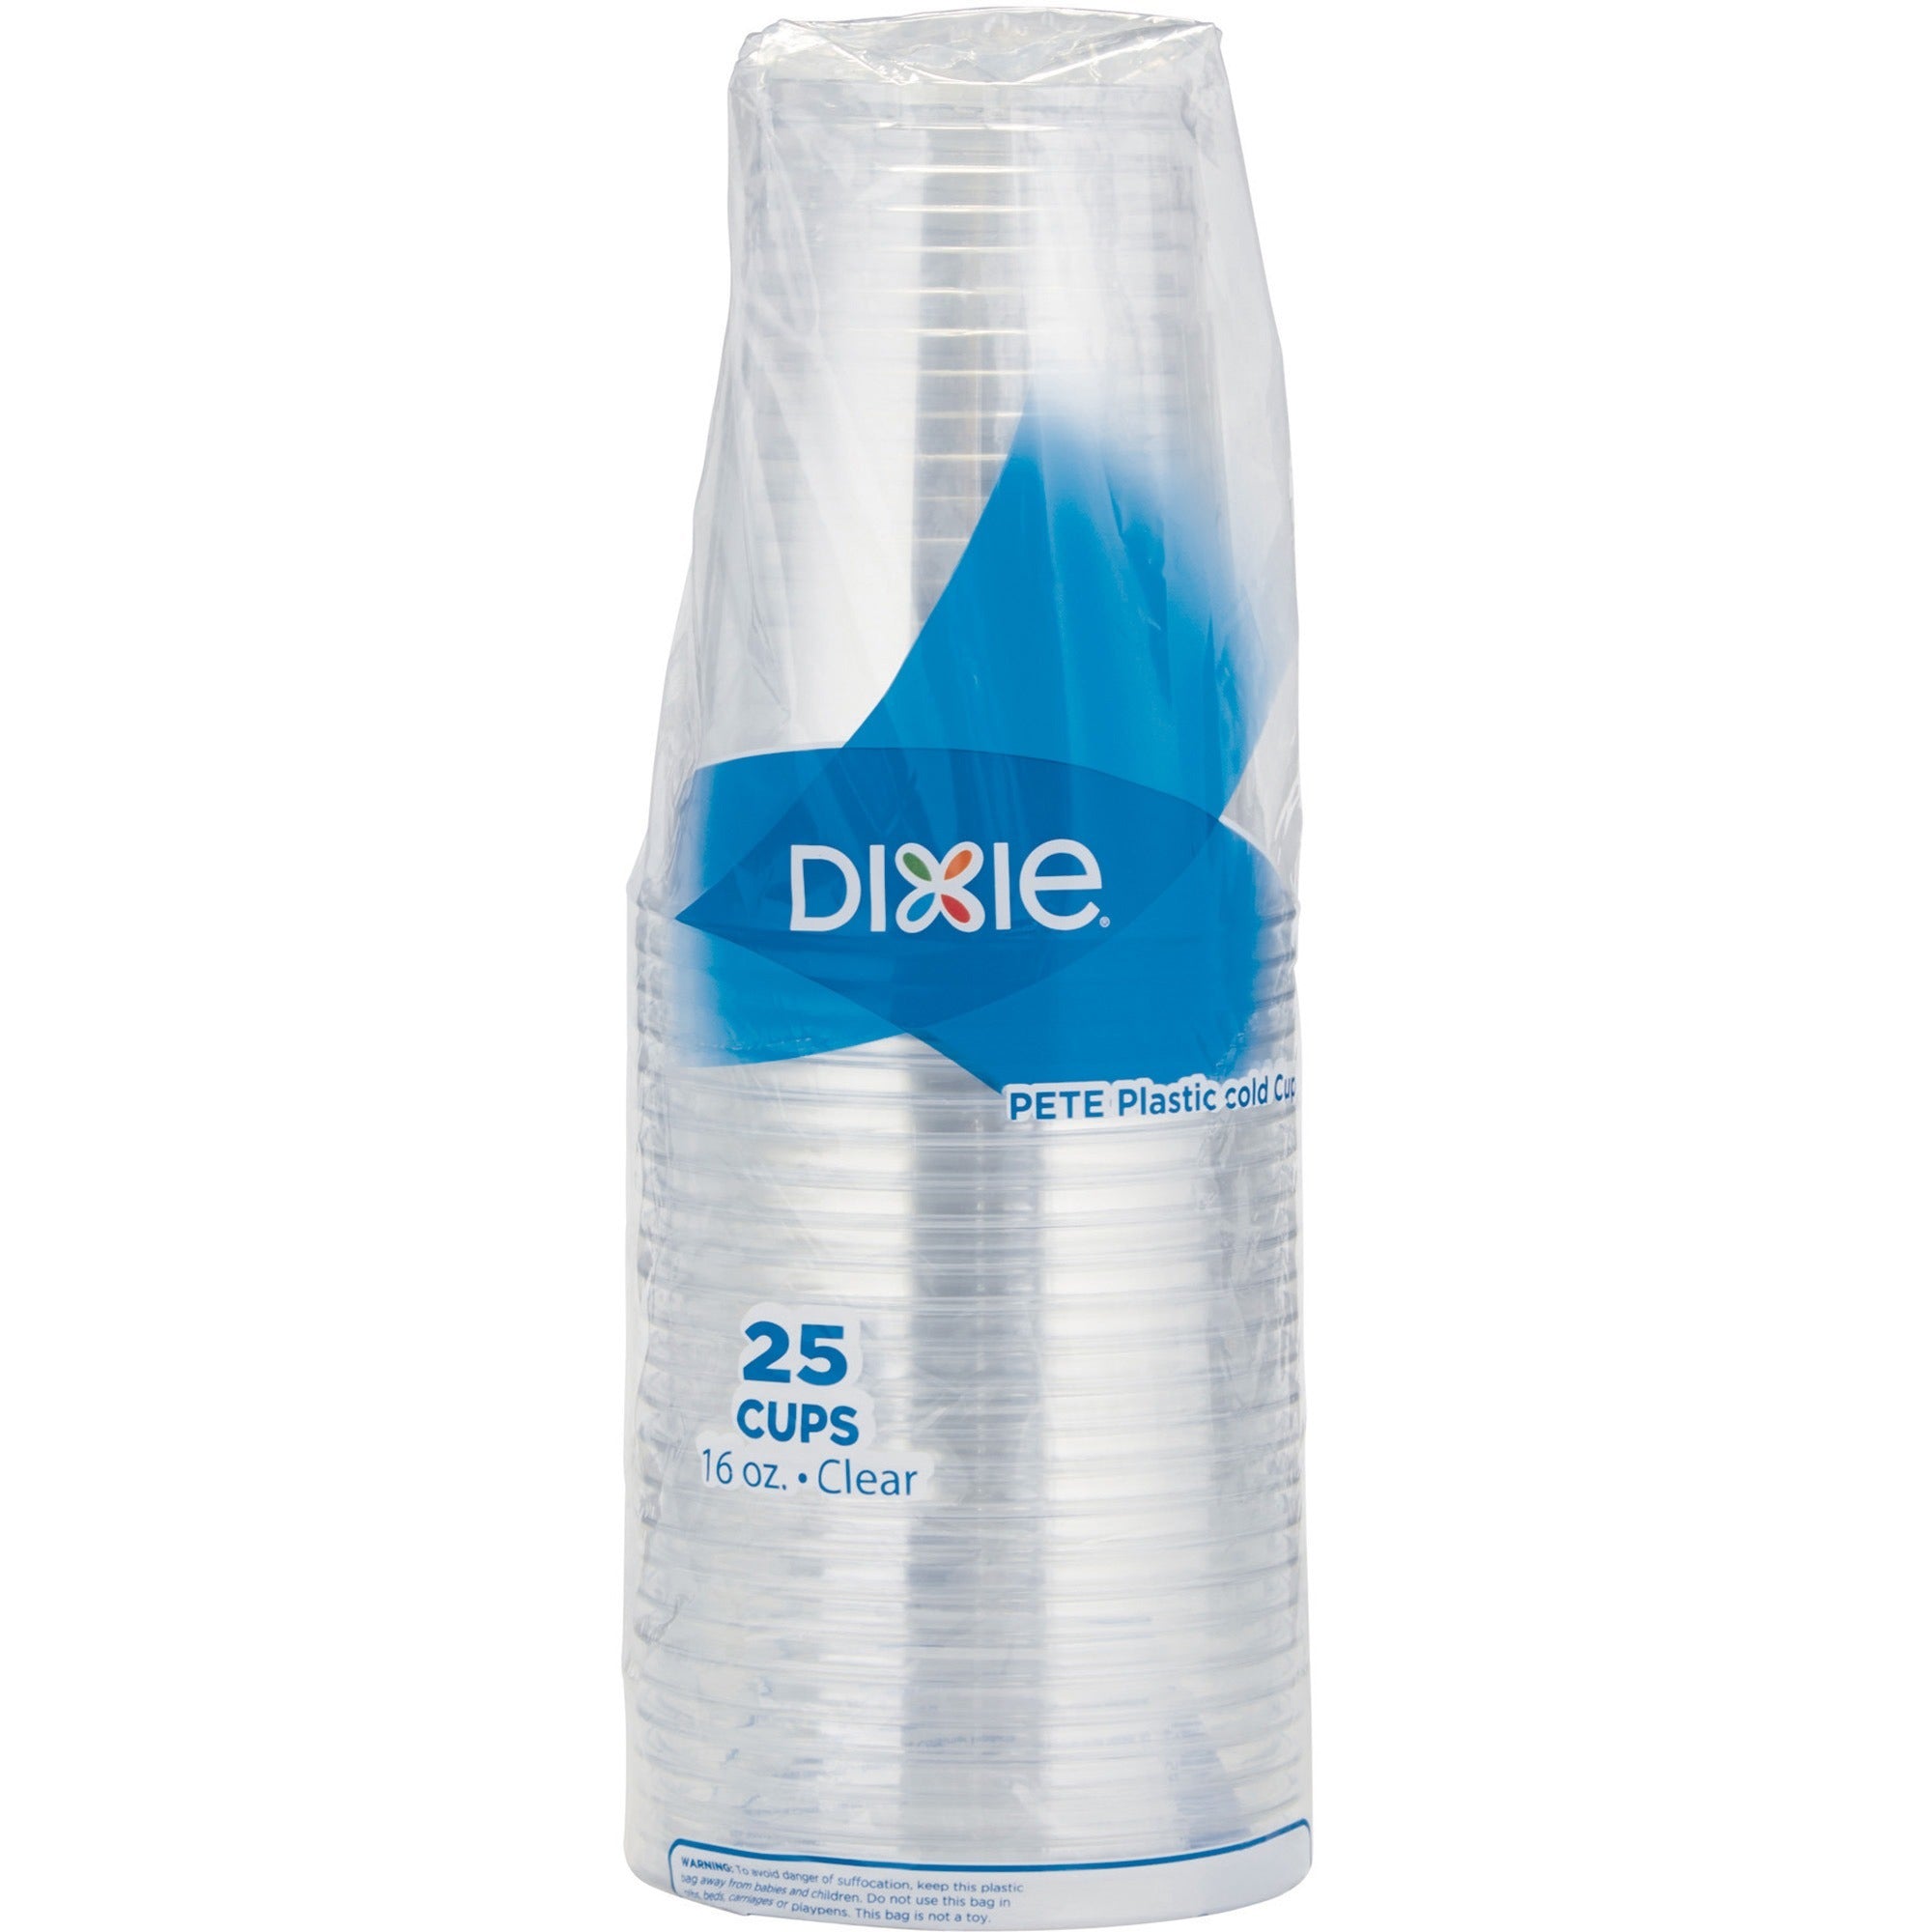 dixie-16-oz-cold-cups-by-gp-pro-25-pack-clear-pete-plastic-soda-iced-coffee-sample-restaurant-coffee-shop-breakroom-lobby-beverage-cold-drink_dxecpet16dx - 1